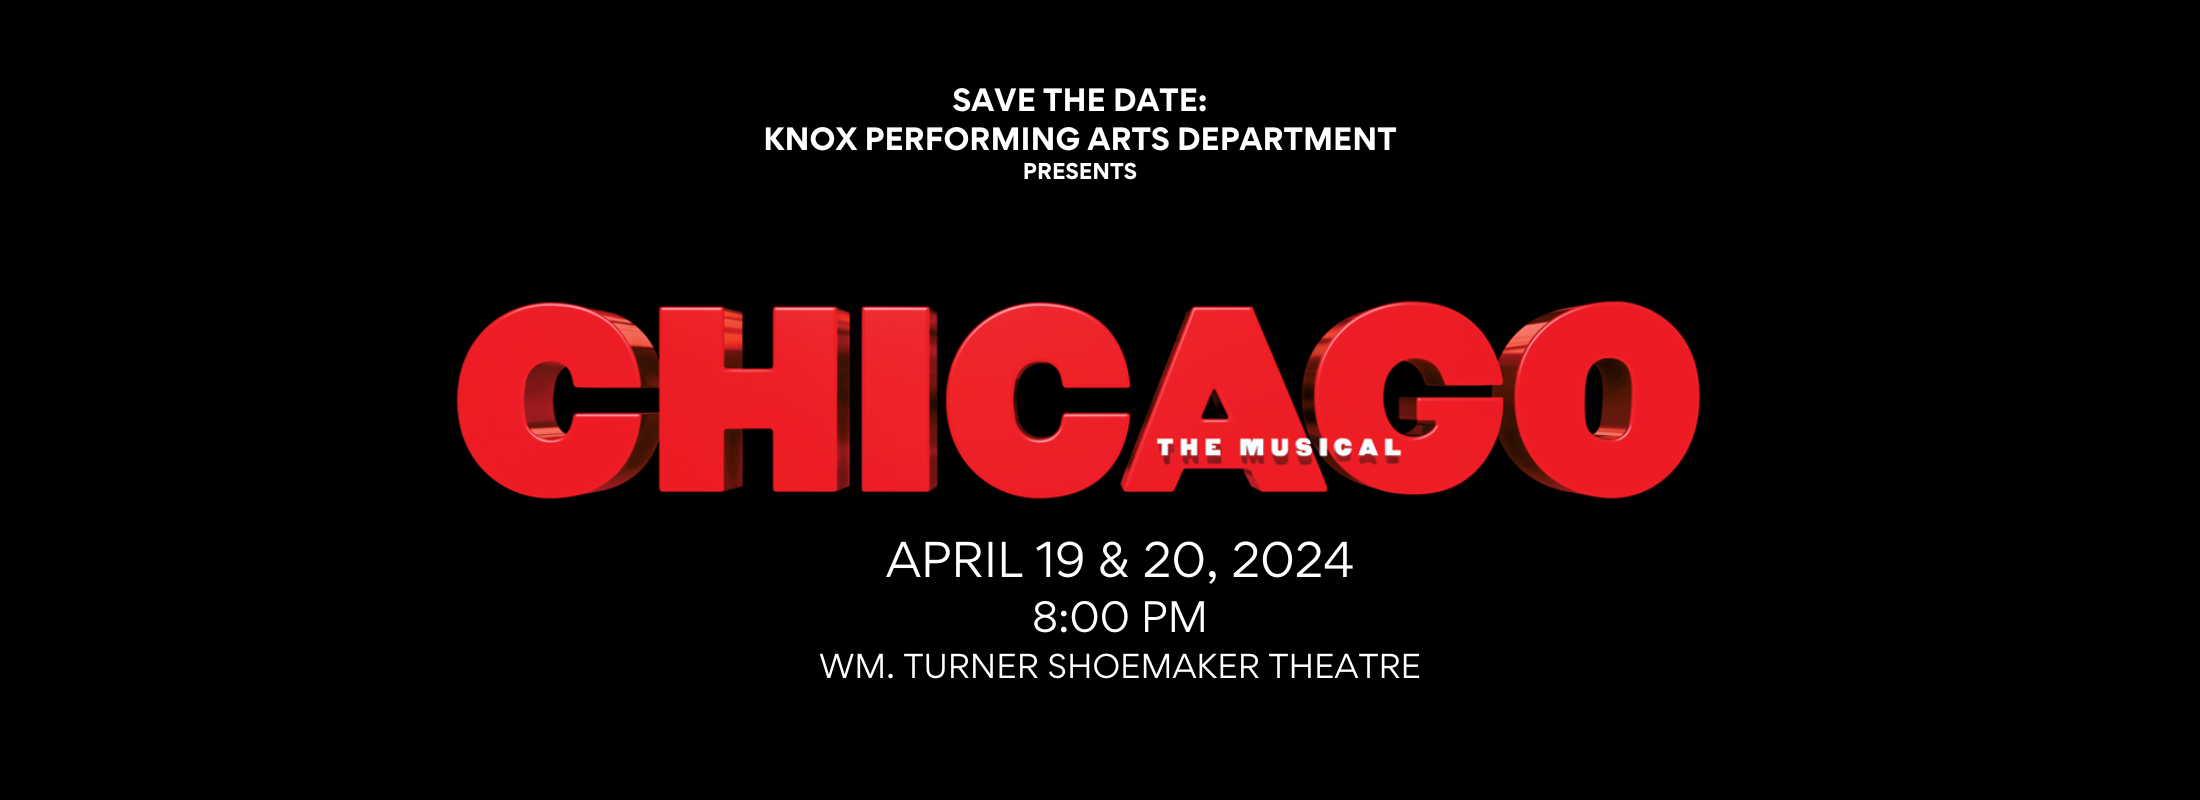 Save the Date for Chicago - Graphic